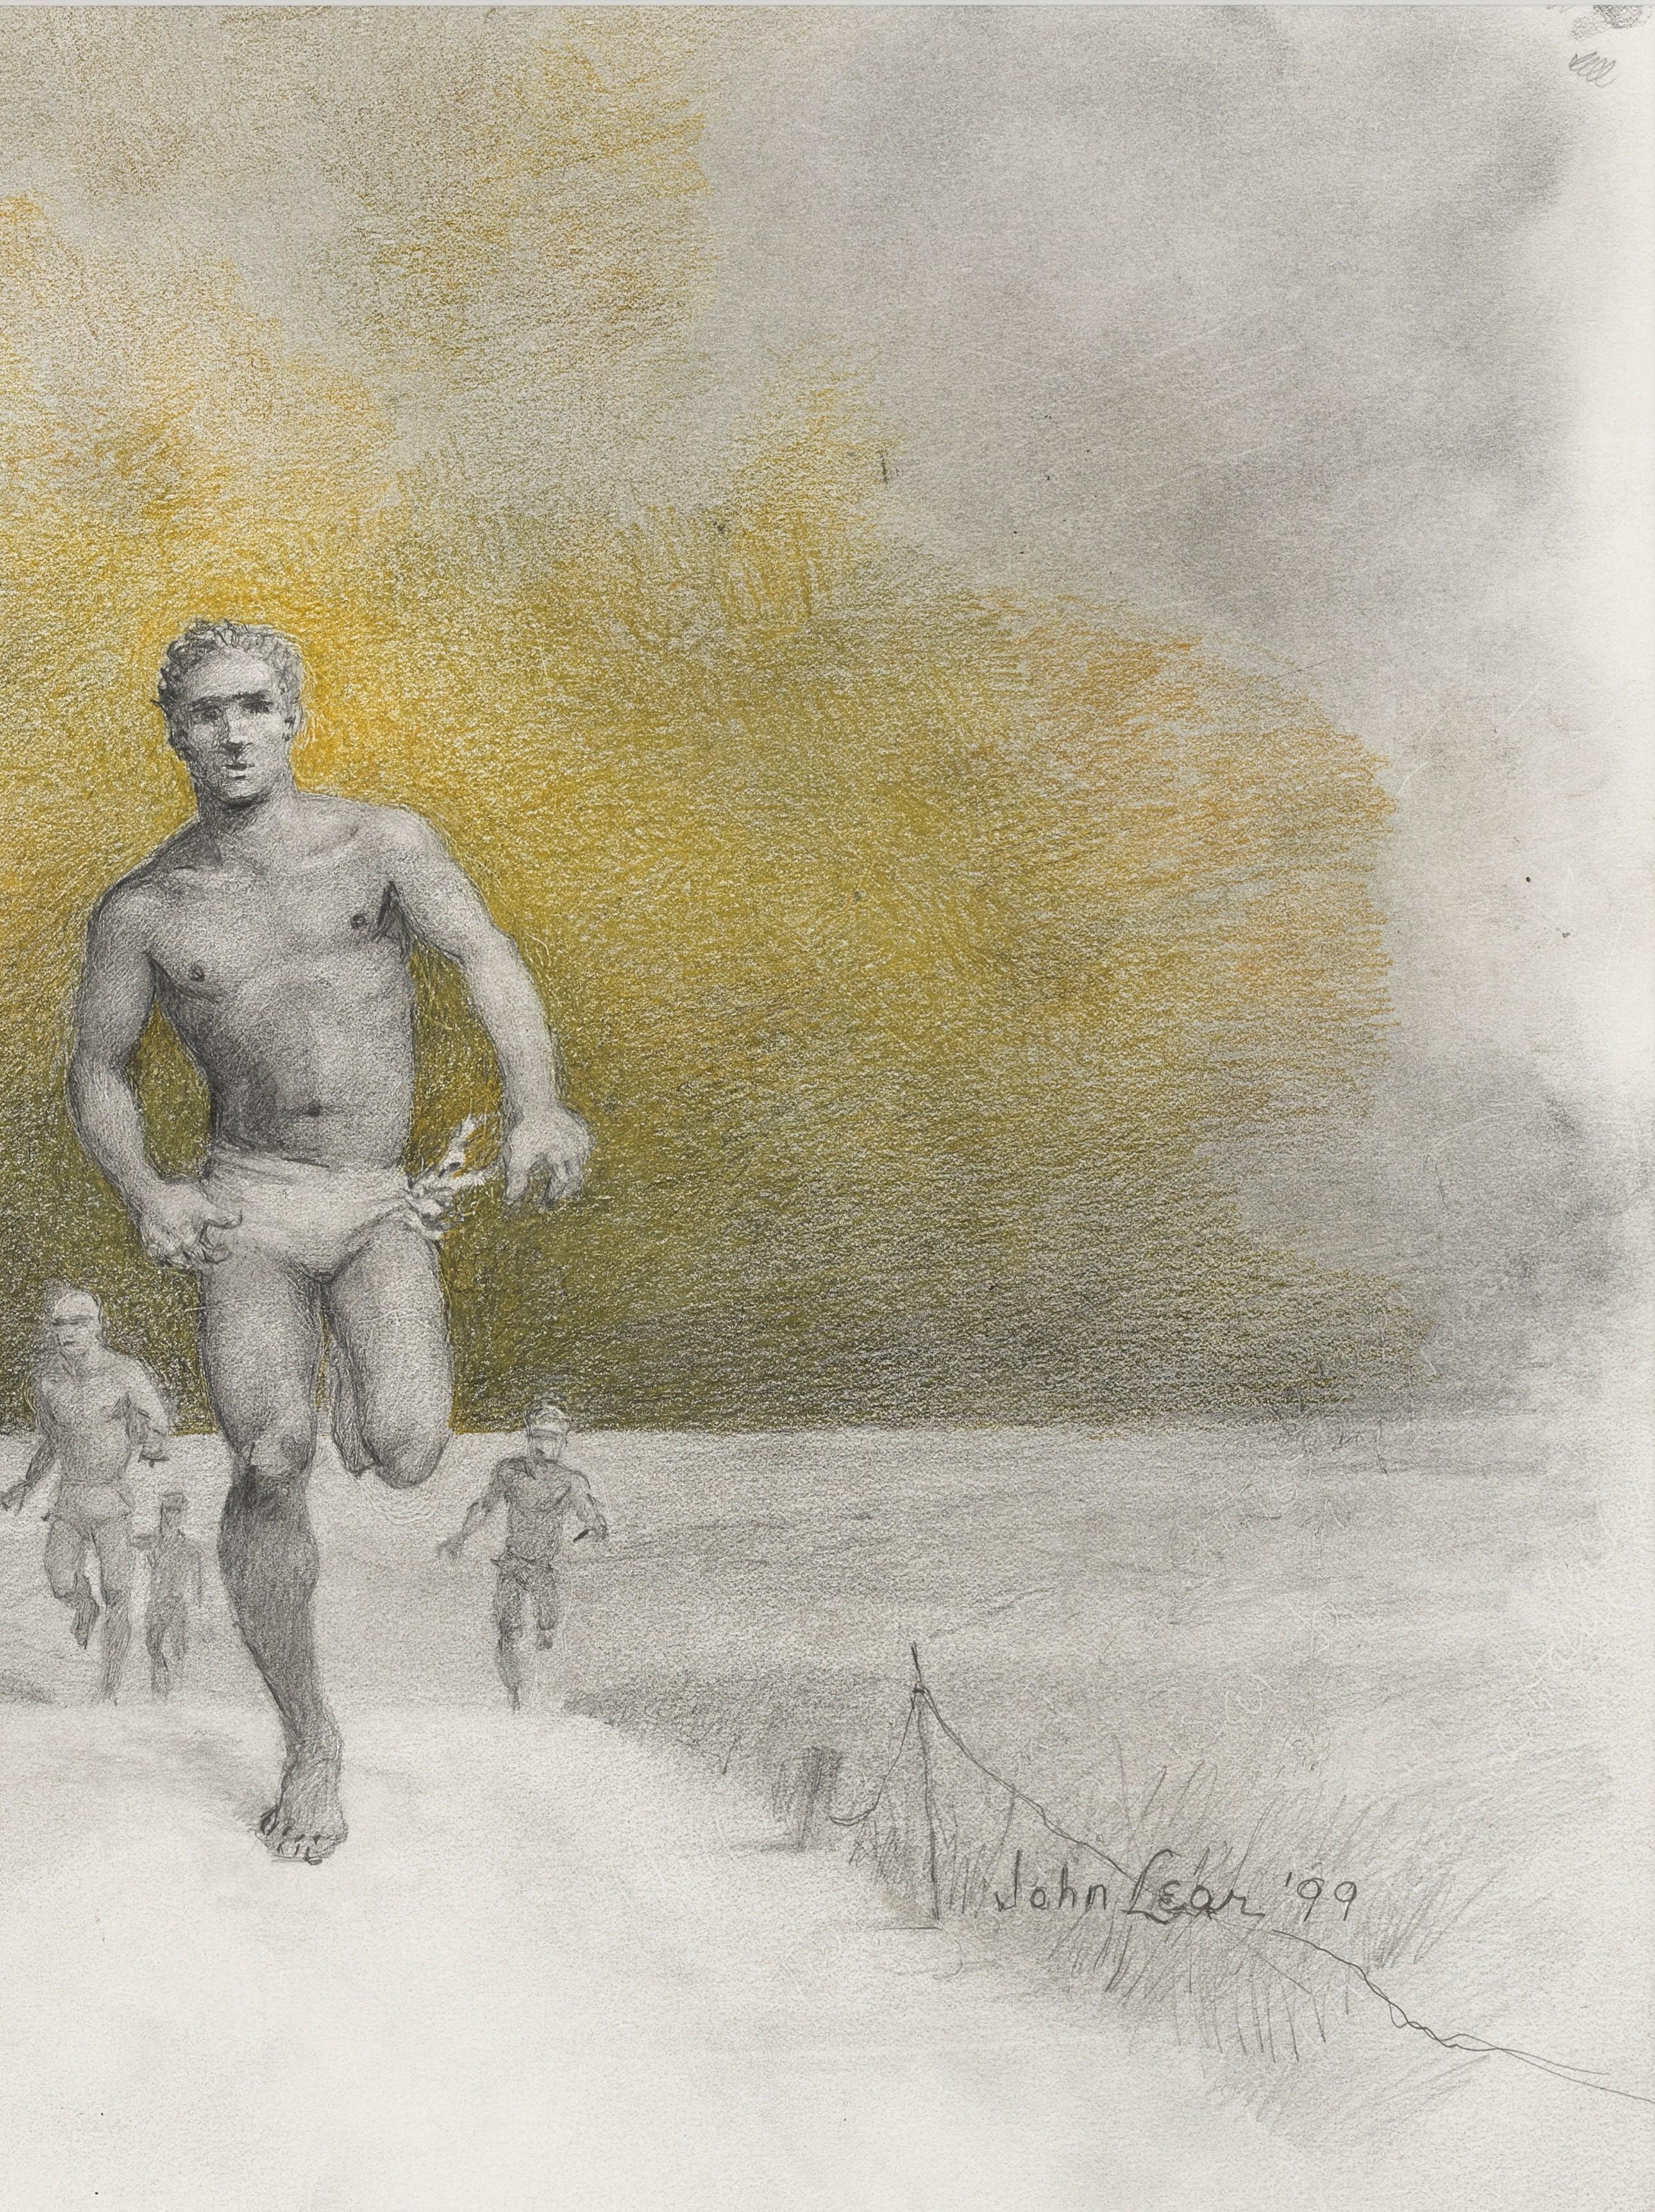 Graphite and coloured pencil on paper, signed and dated (lower right), 36cm x 44cm, (45cm x 53cm framed). The picture is behind museum quality non-reflective UV glass. 

Throughout his long career, Lear primarily explored homoeroticism in a truly